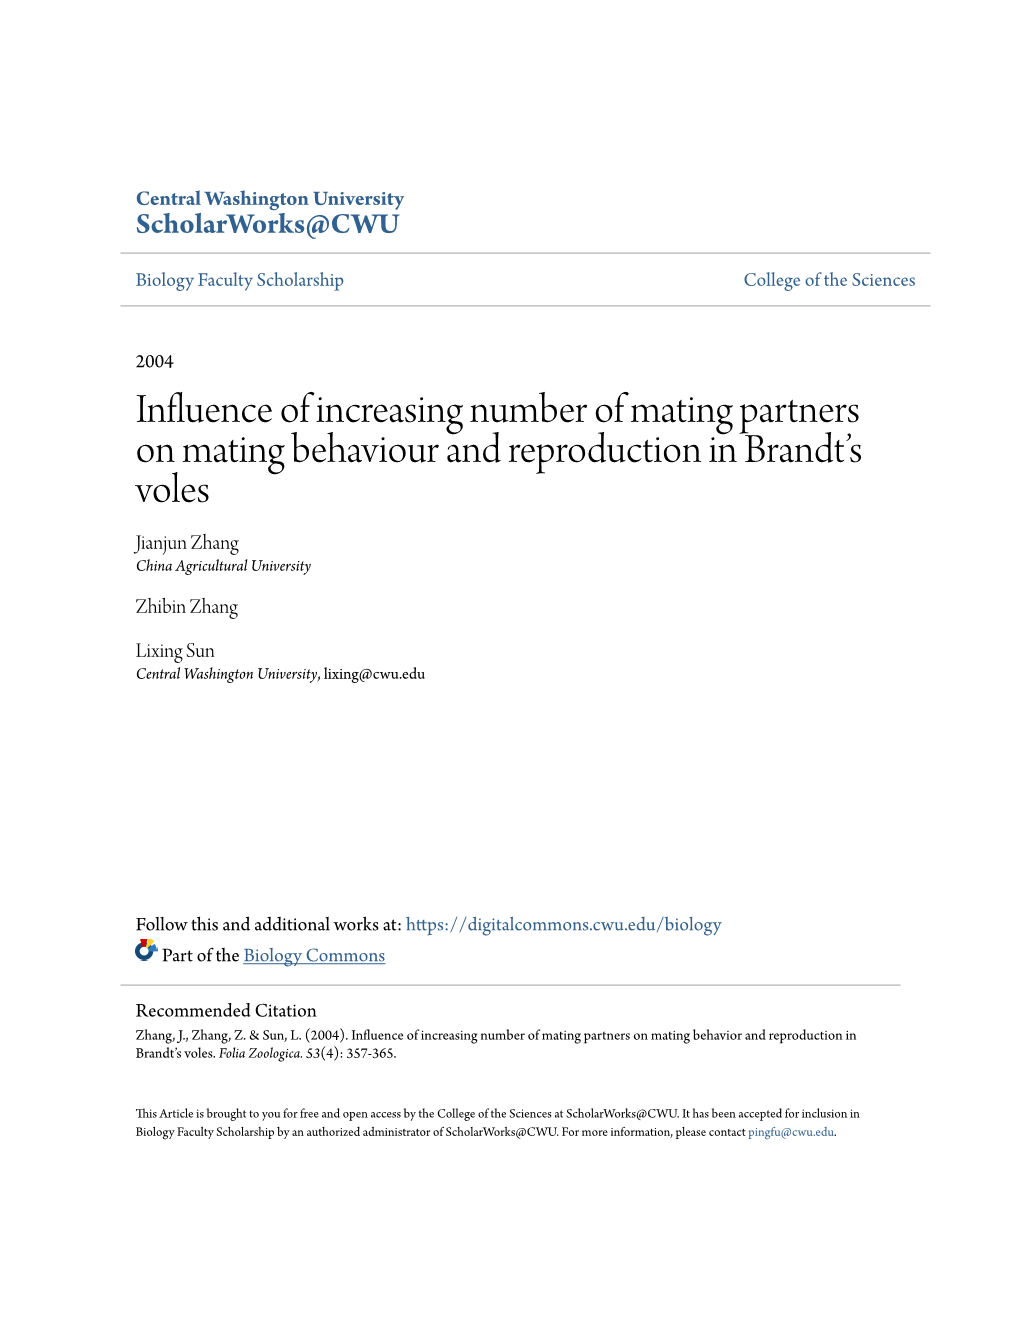 Influence of Increasing Number of Mating Partners on Mating Behaviour and Reproduction in Brandt’S Voles Jianjun Zhang China Agricultural University